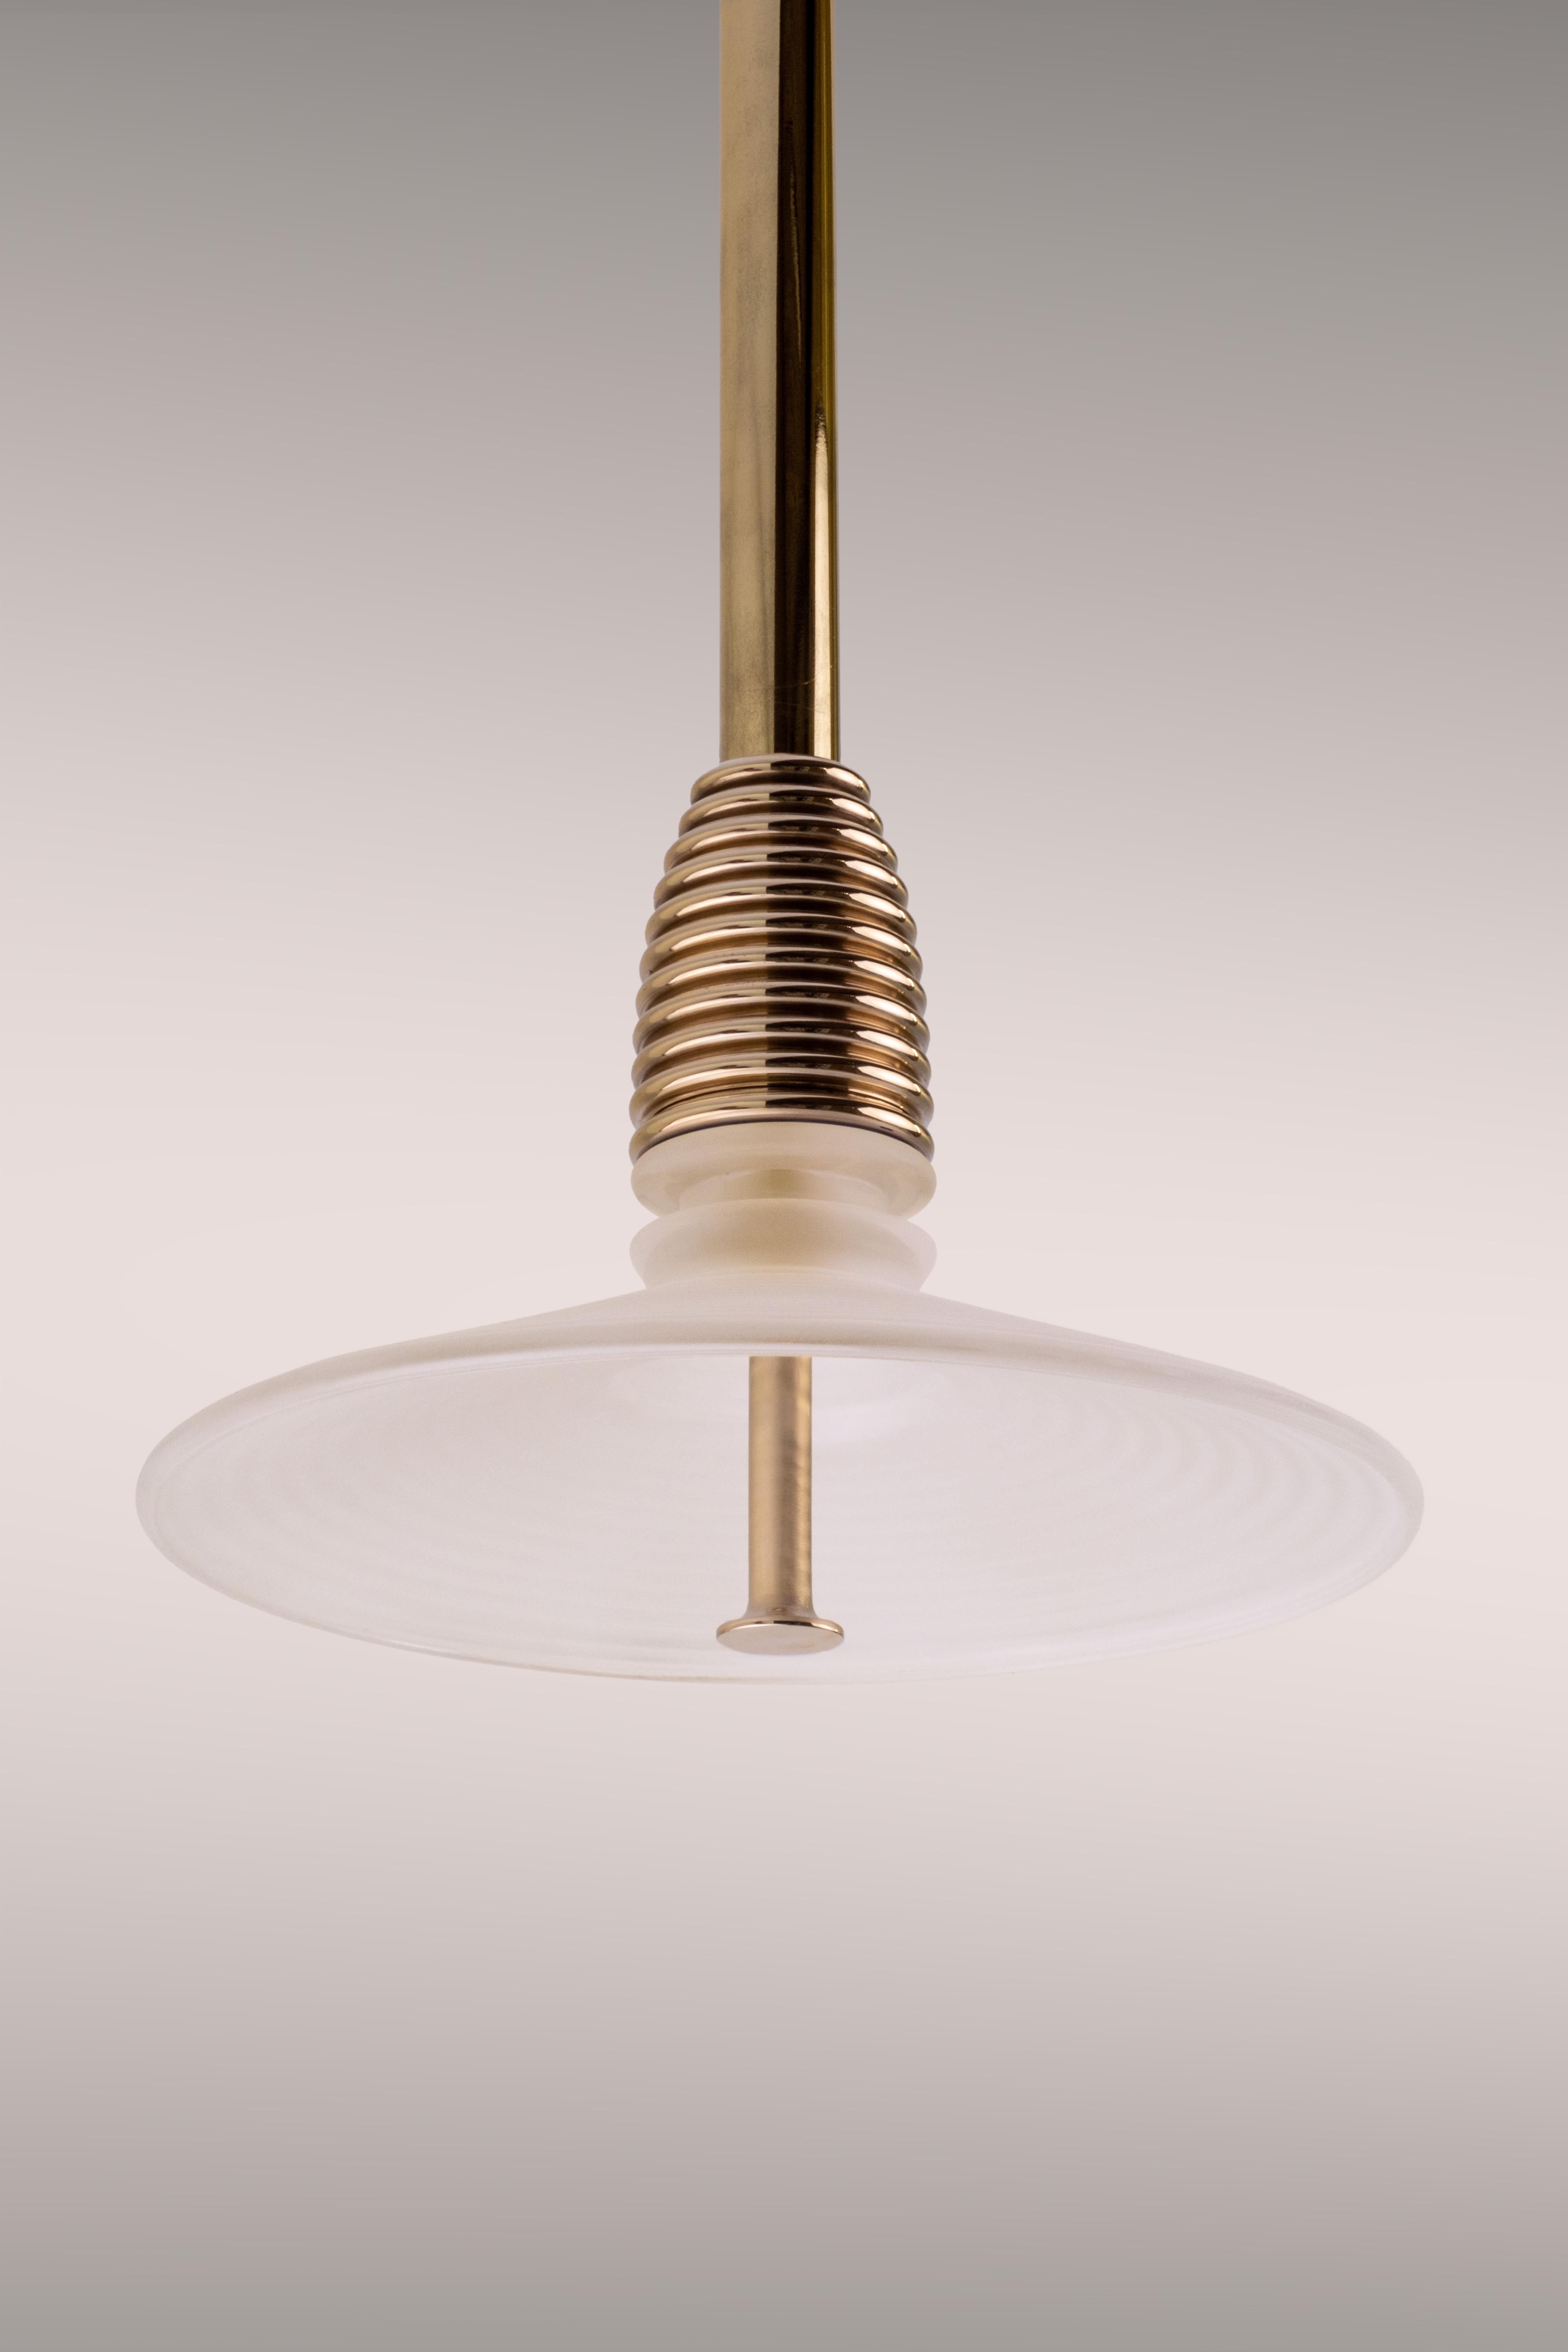 British The Insulator 'B' Pendant in polished brass and clear glass by NOVOCASTRIAN deco For Sale